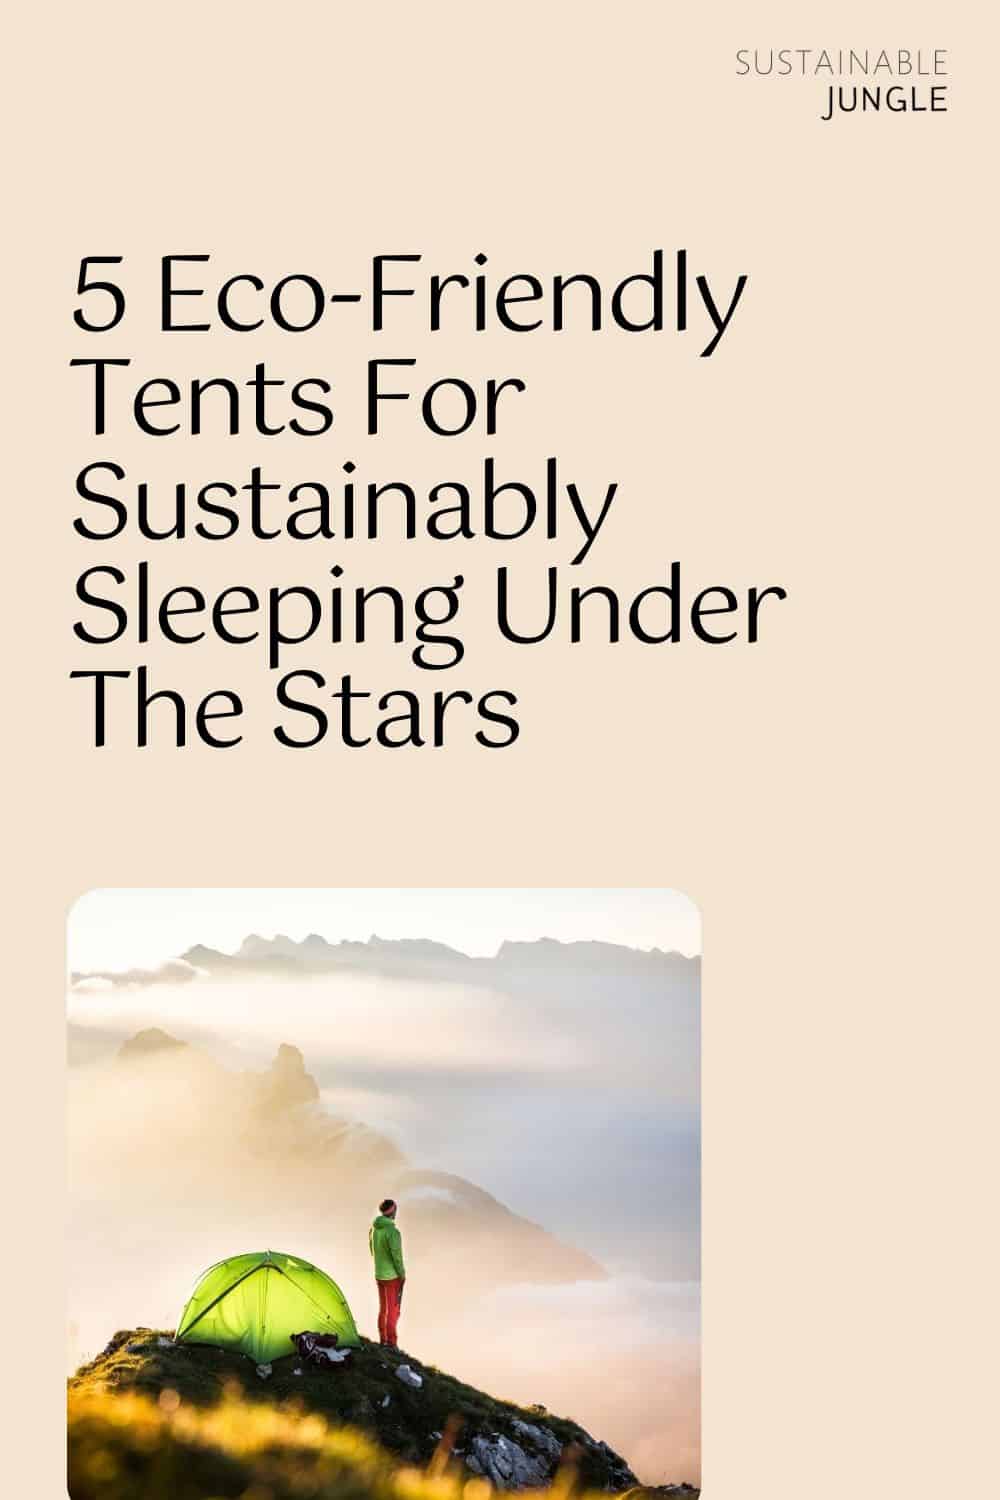 5 Eco-Friendly Tents For Sustainably Sleeping Under The Stars Image by Vaude #ecofriendlytents #ecofriendlycampingtent #sustainabletents #sustainablecampingtents #ecofriendlytentsforsale #ecotent #sustainablejungle